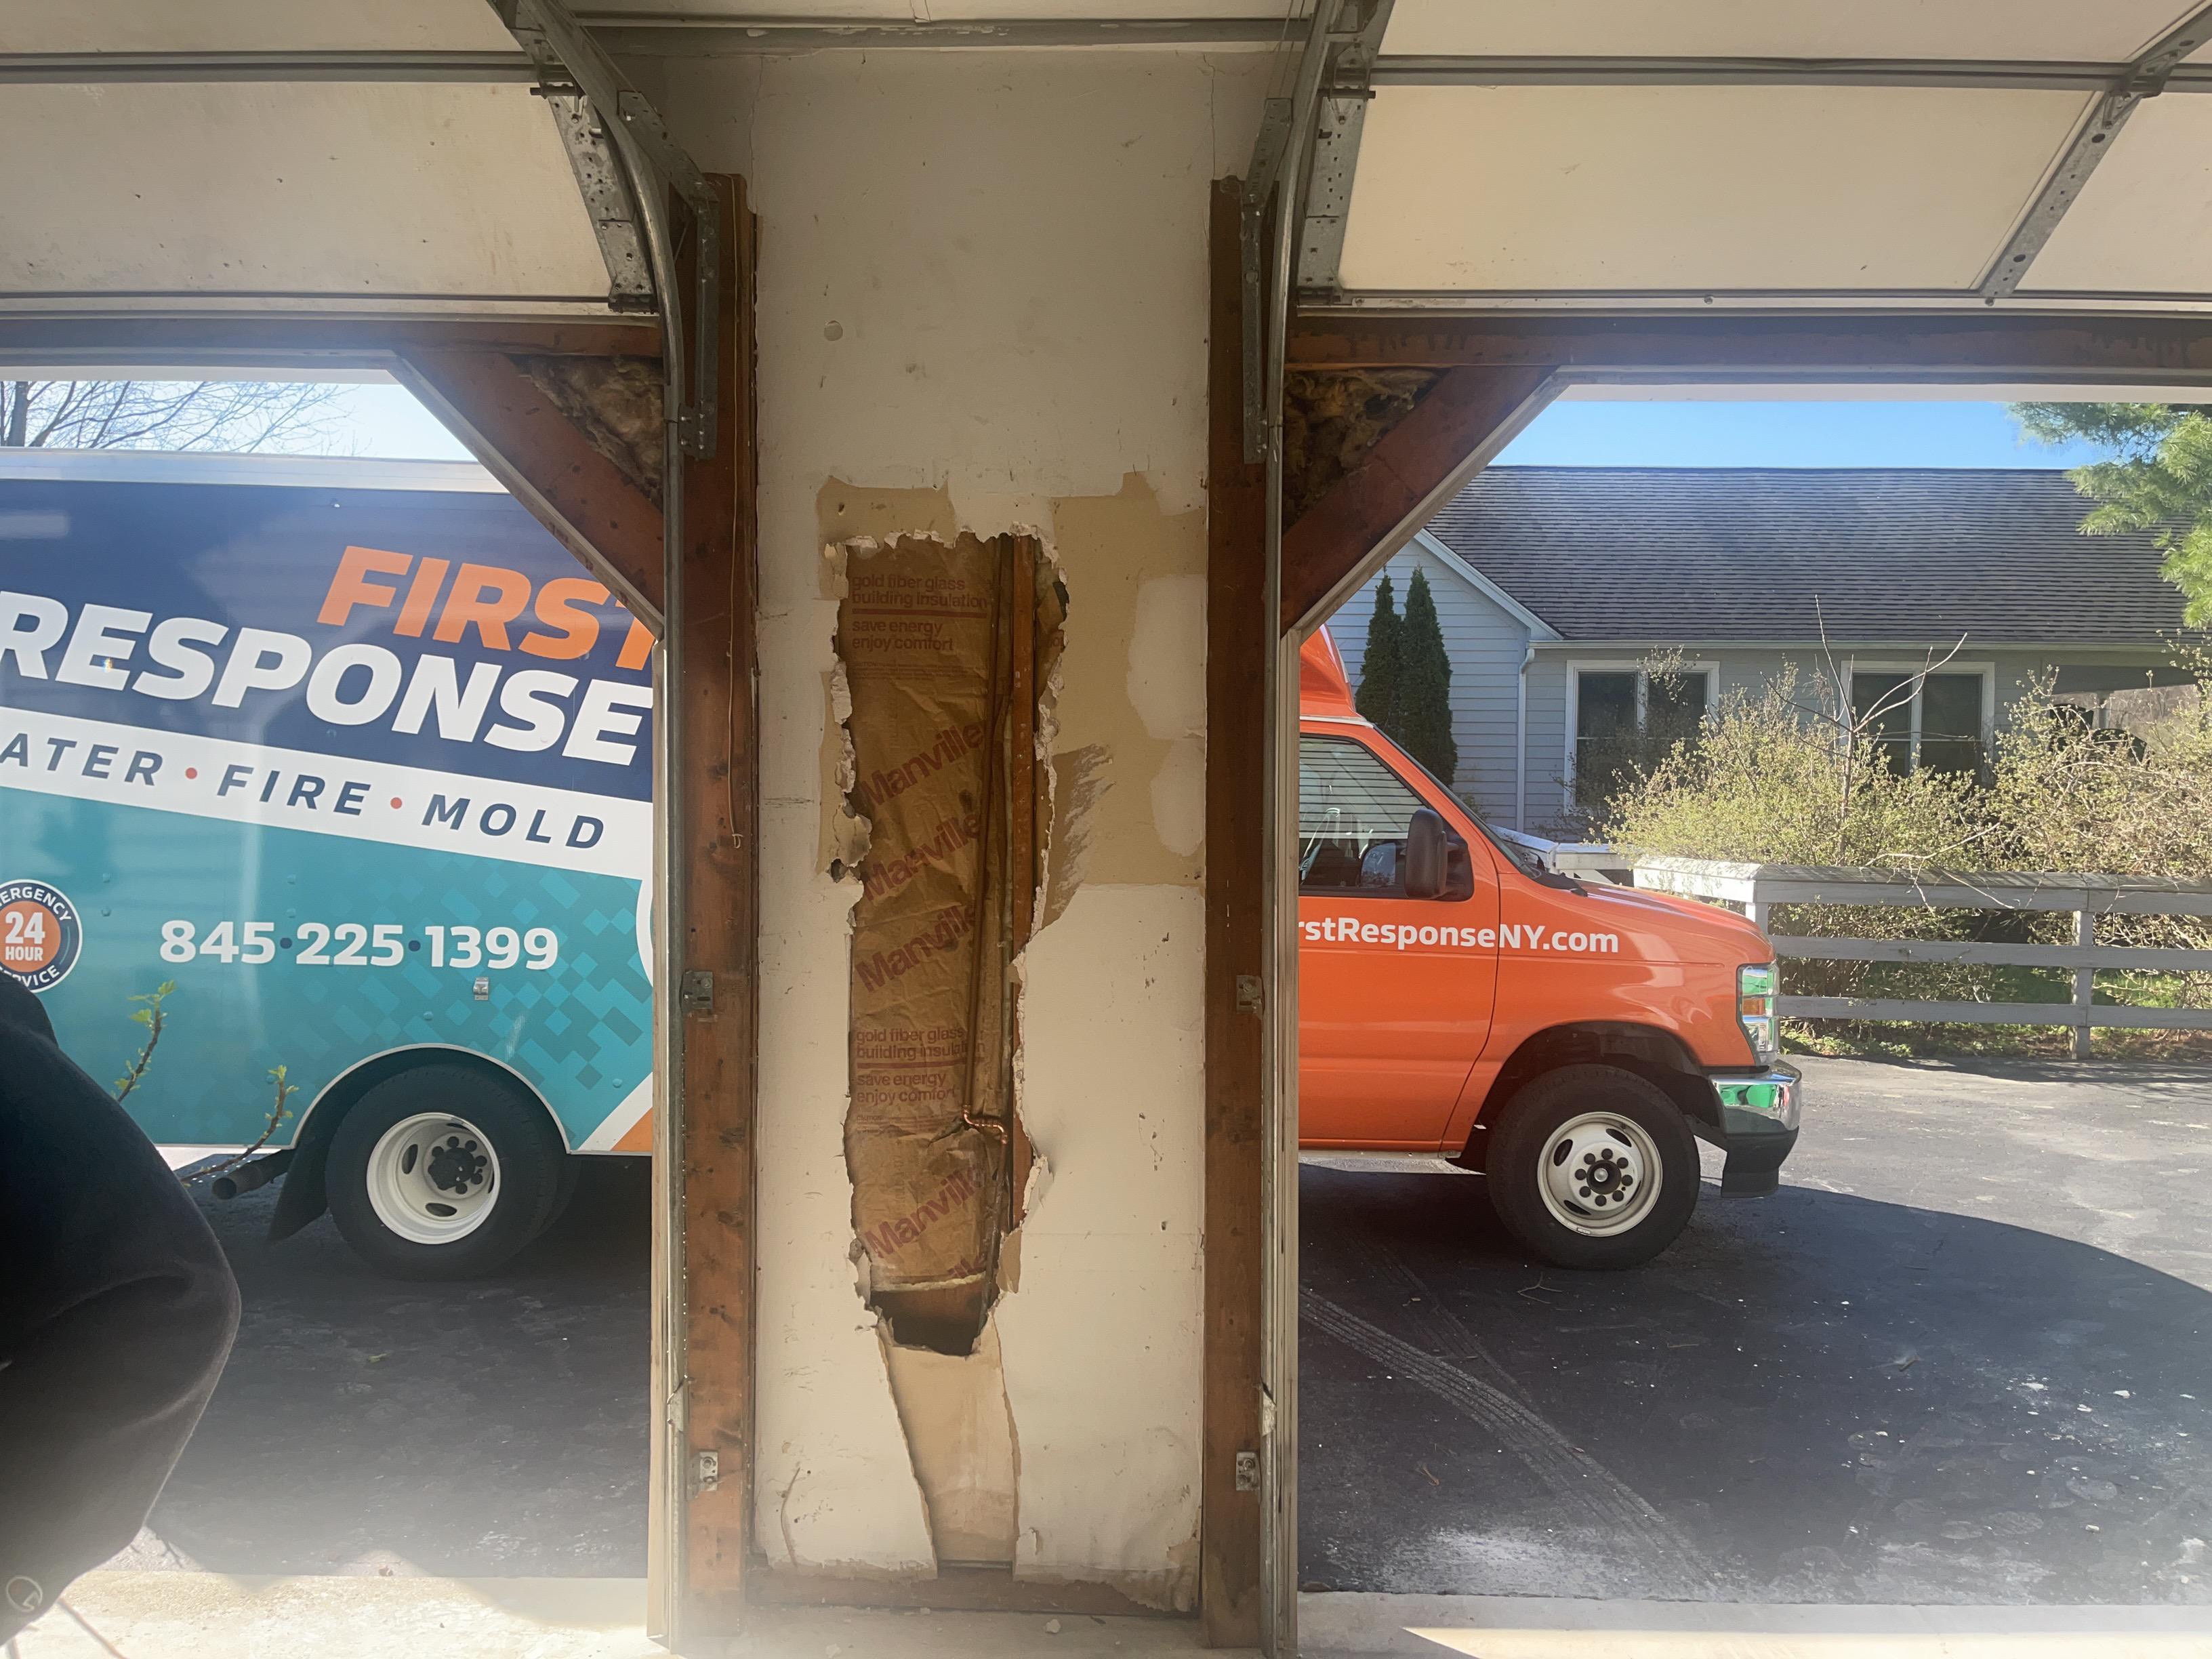 Water damage affected exterior walls